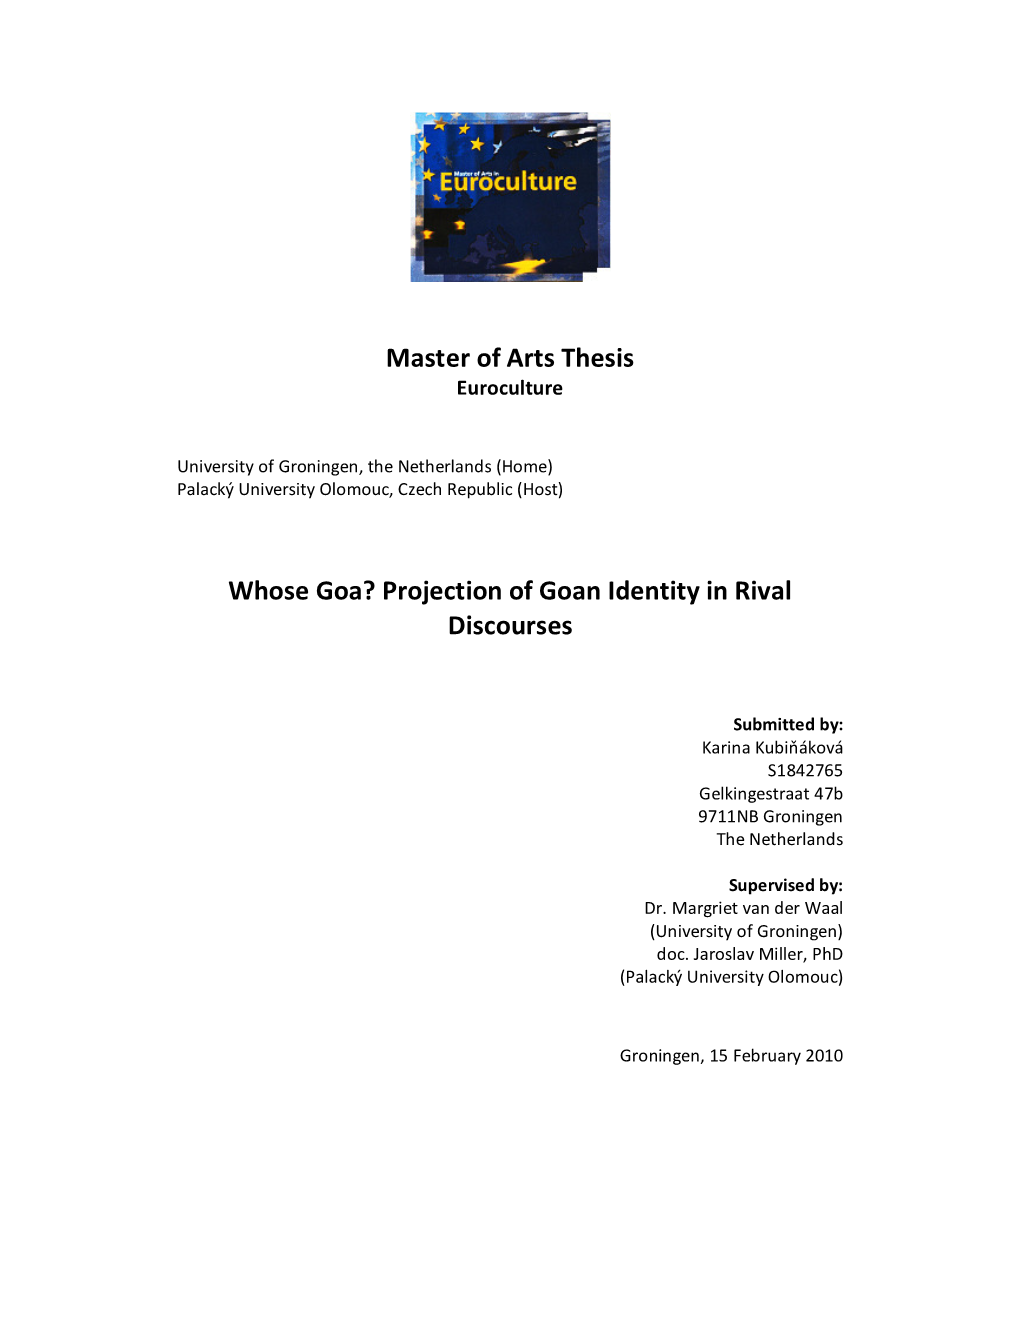 Master of Arts Thesis Whose Goa? Projection of Goan Identity in Rival